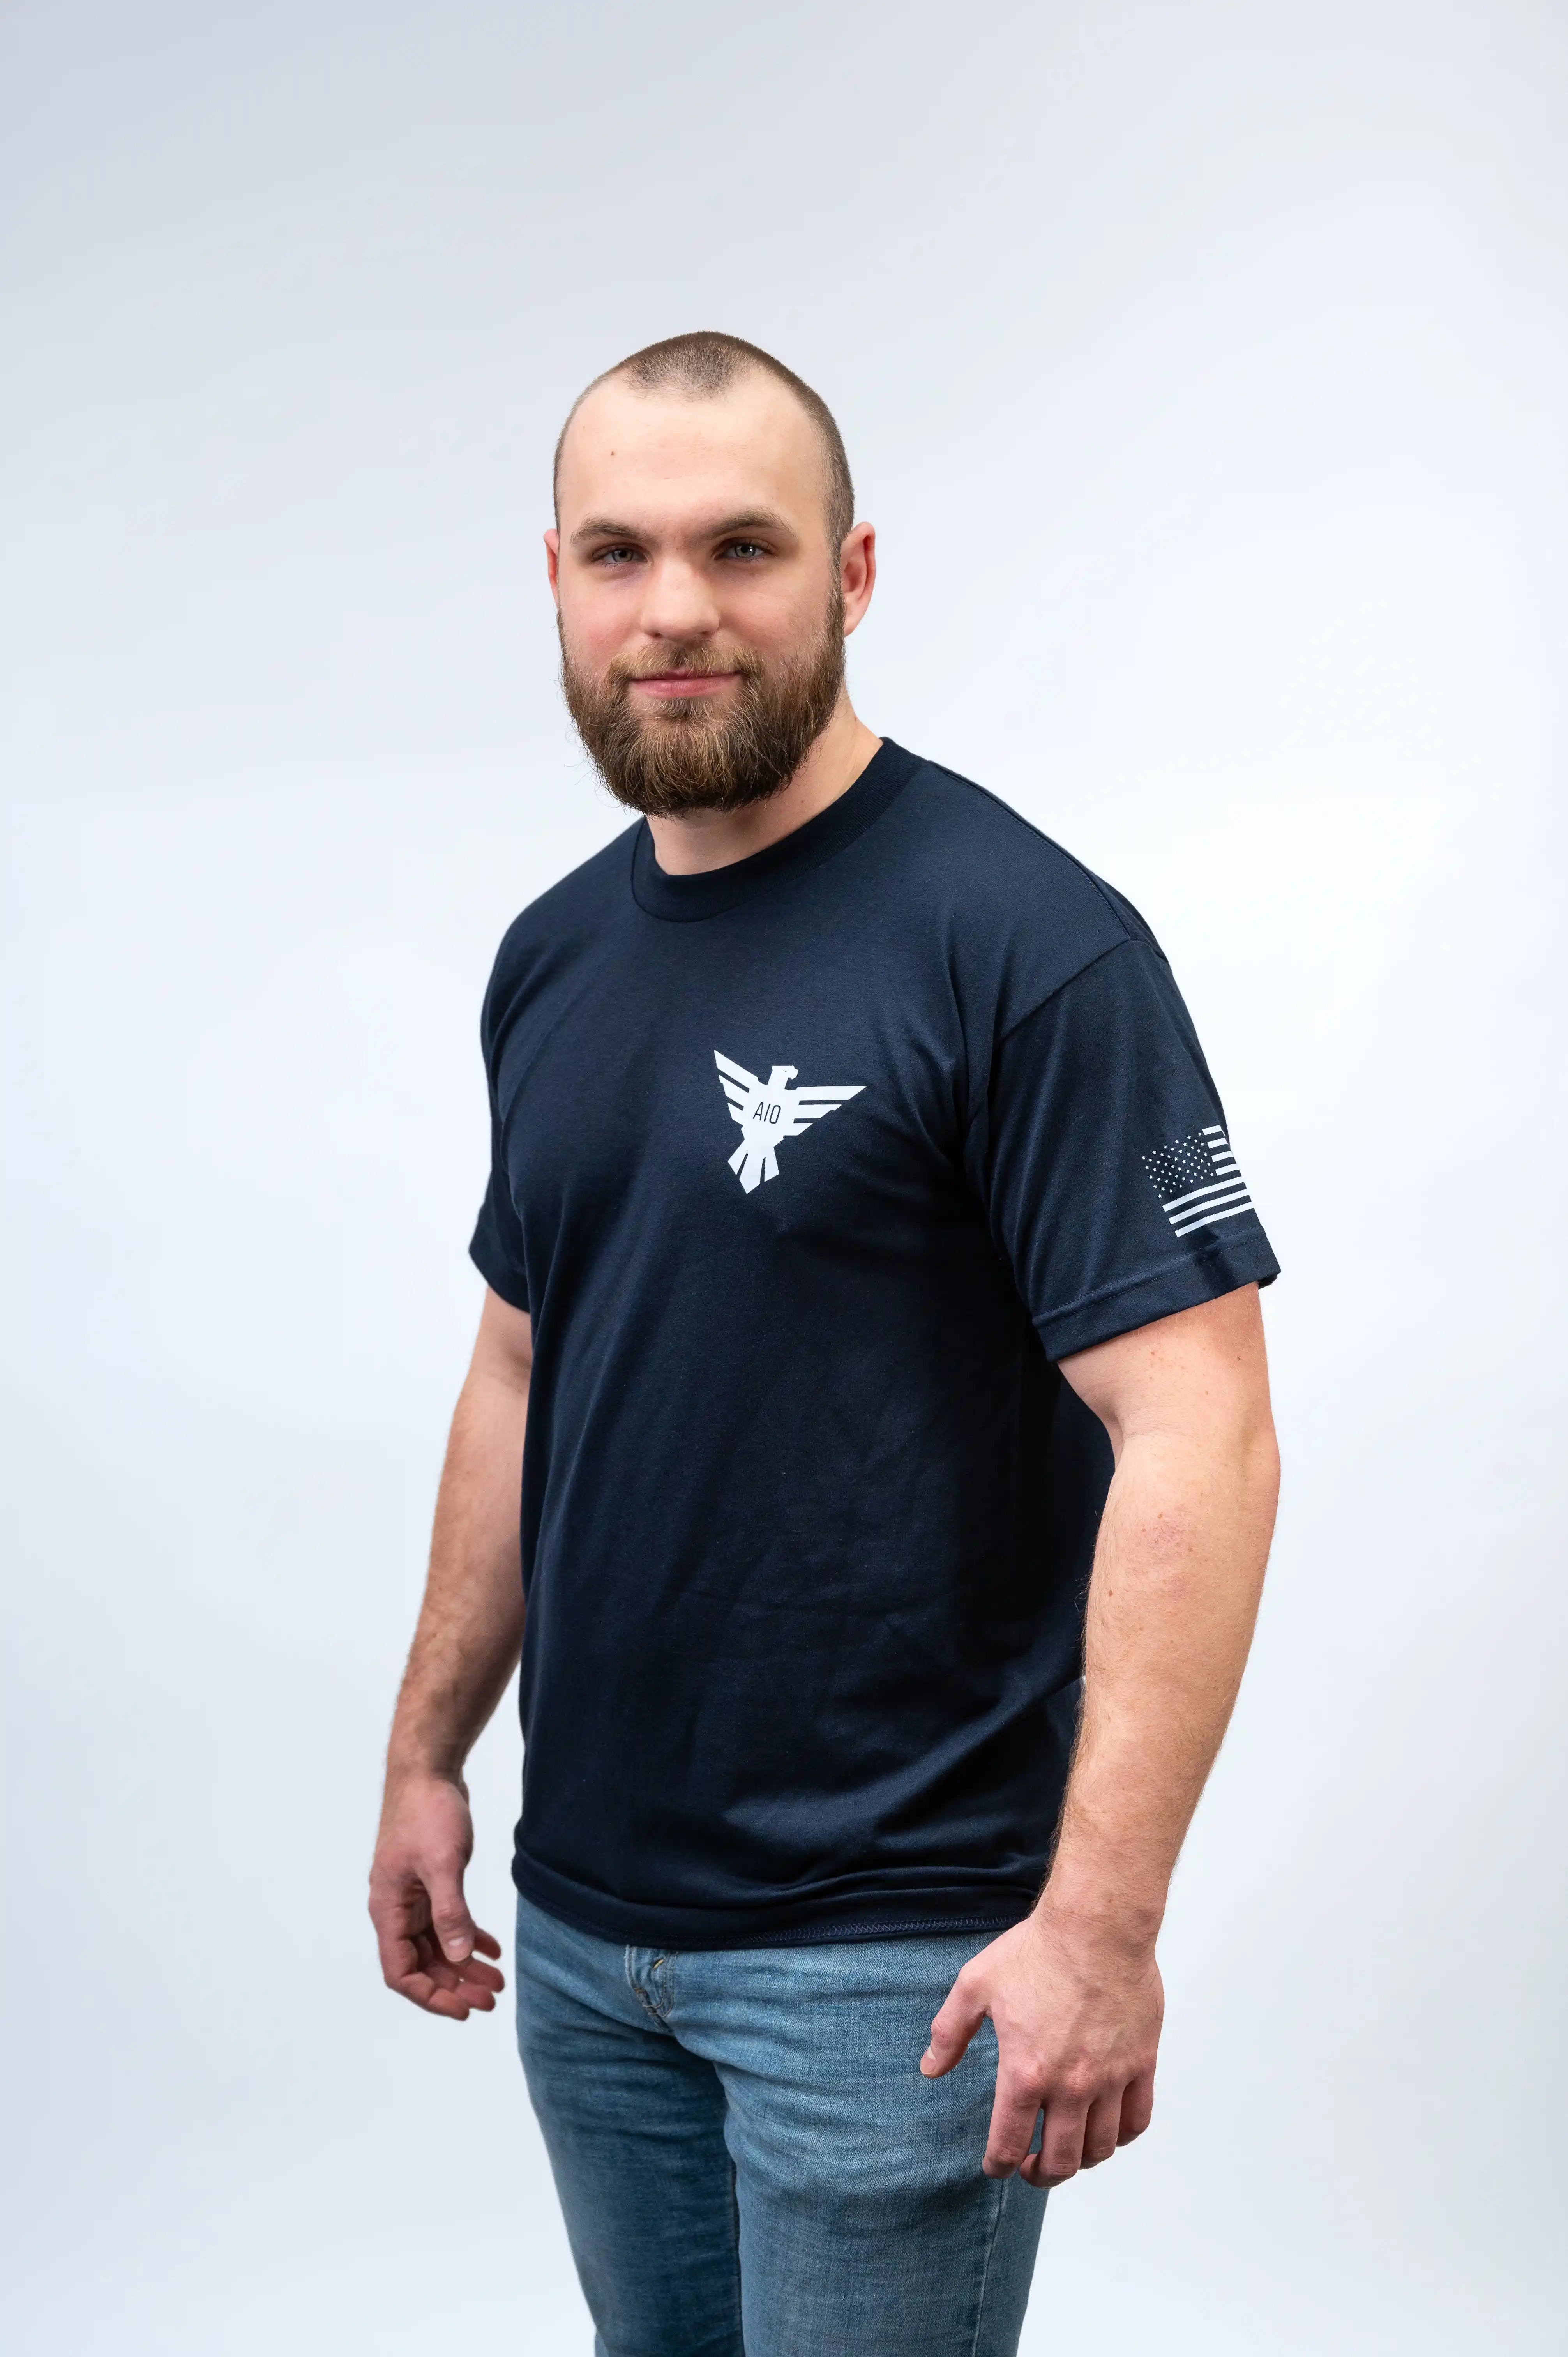 Man with a beard in a navy blue t-shirt with a logo on the chest and an American flag on the right sleeve, standing against a light background.